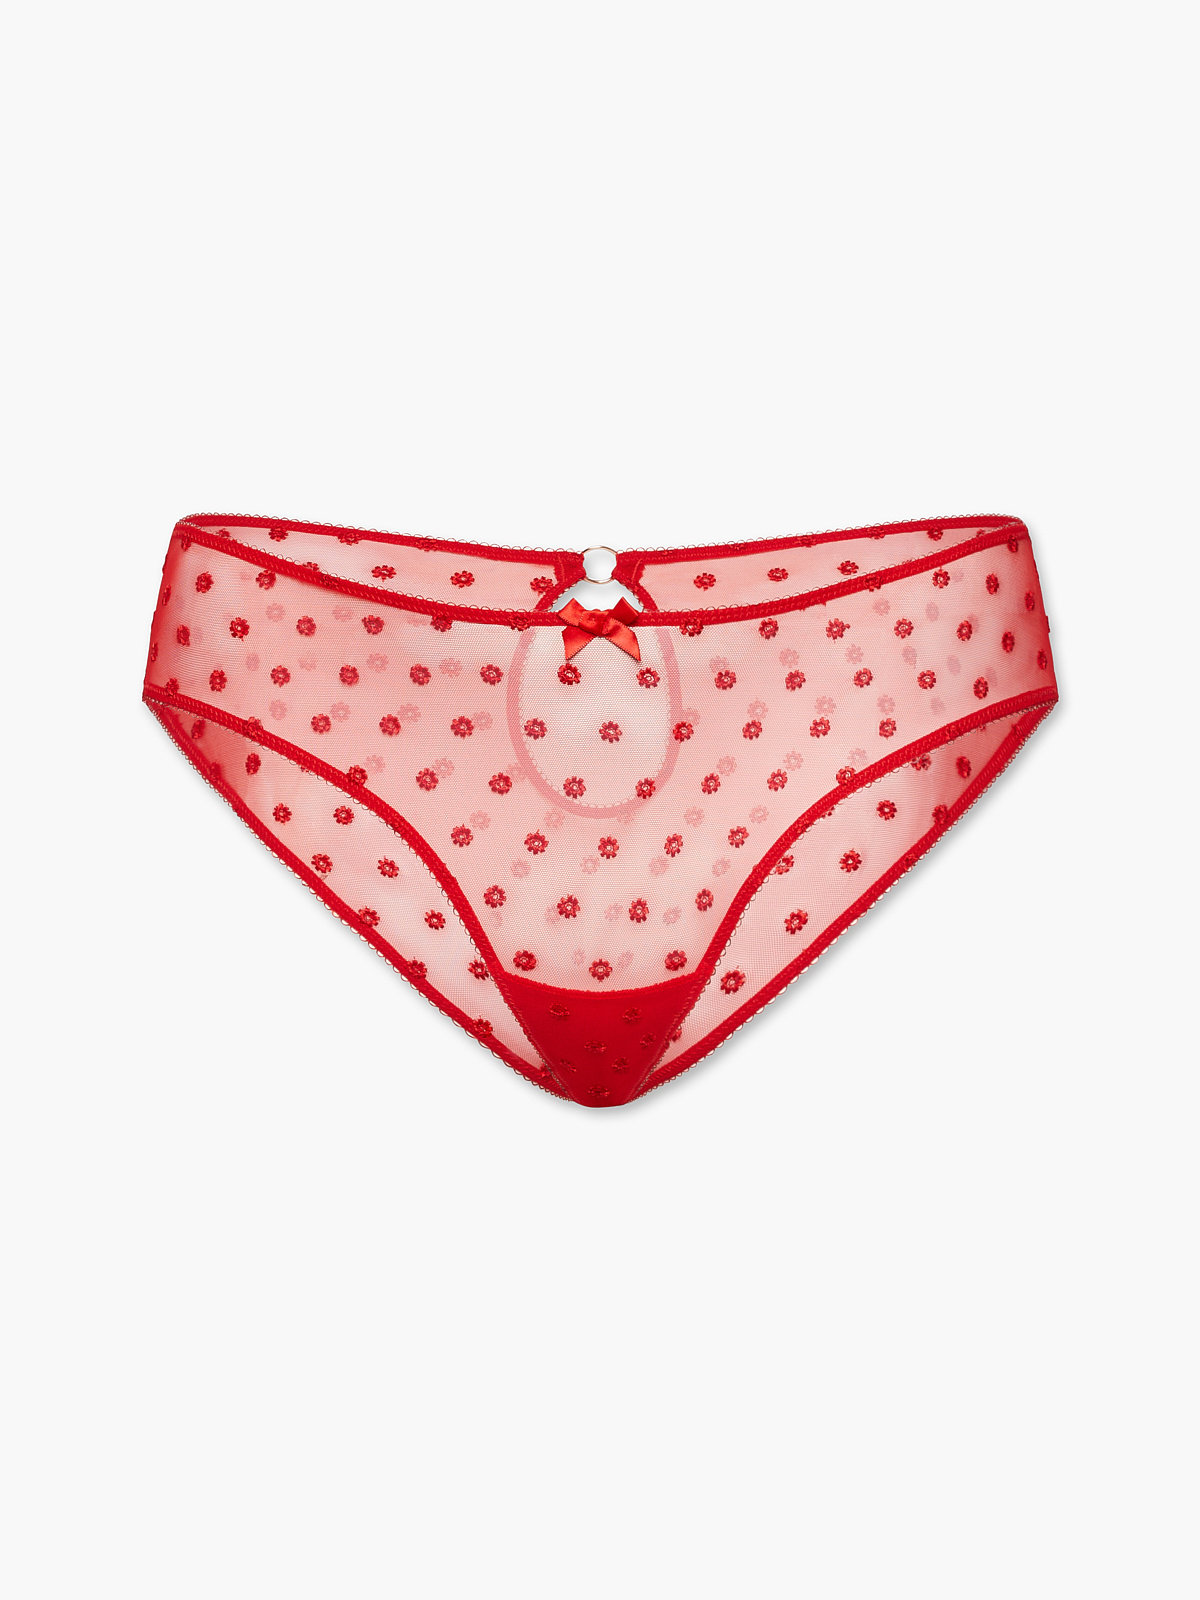 Ruffle Luv Cheeky Panty in Red